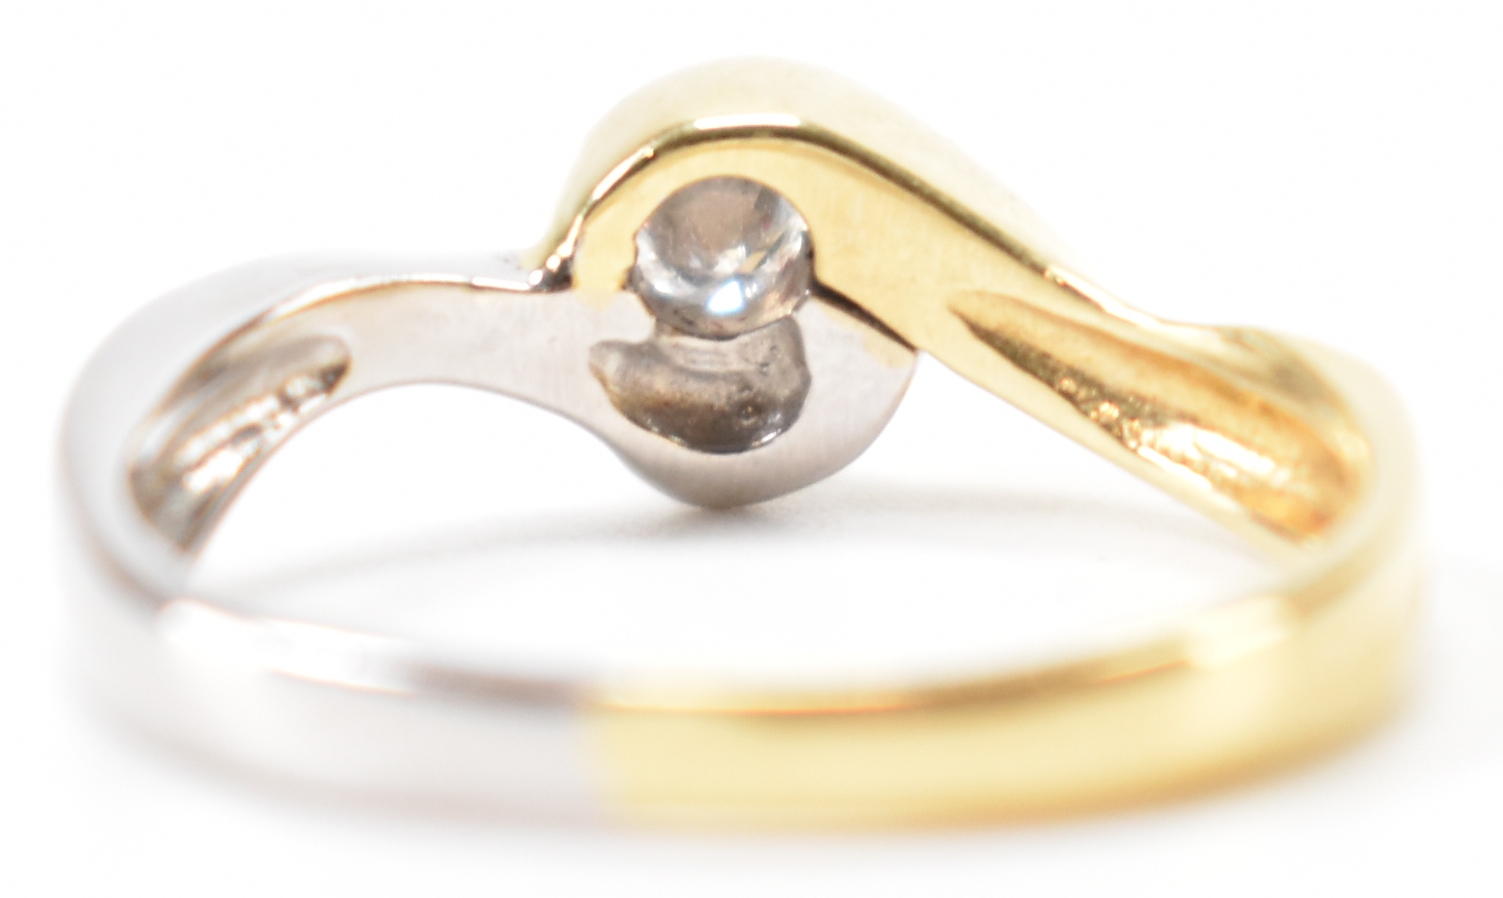 TWO TONE GOLD & DIAMOND CROSSOVER RING - Image 3 of 9